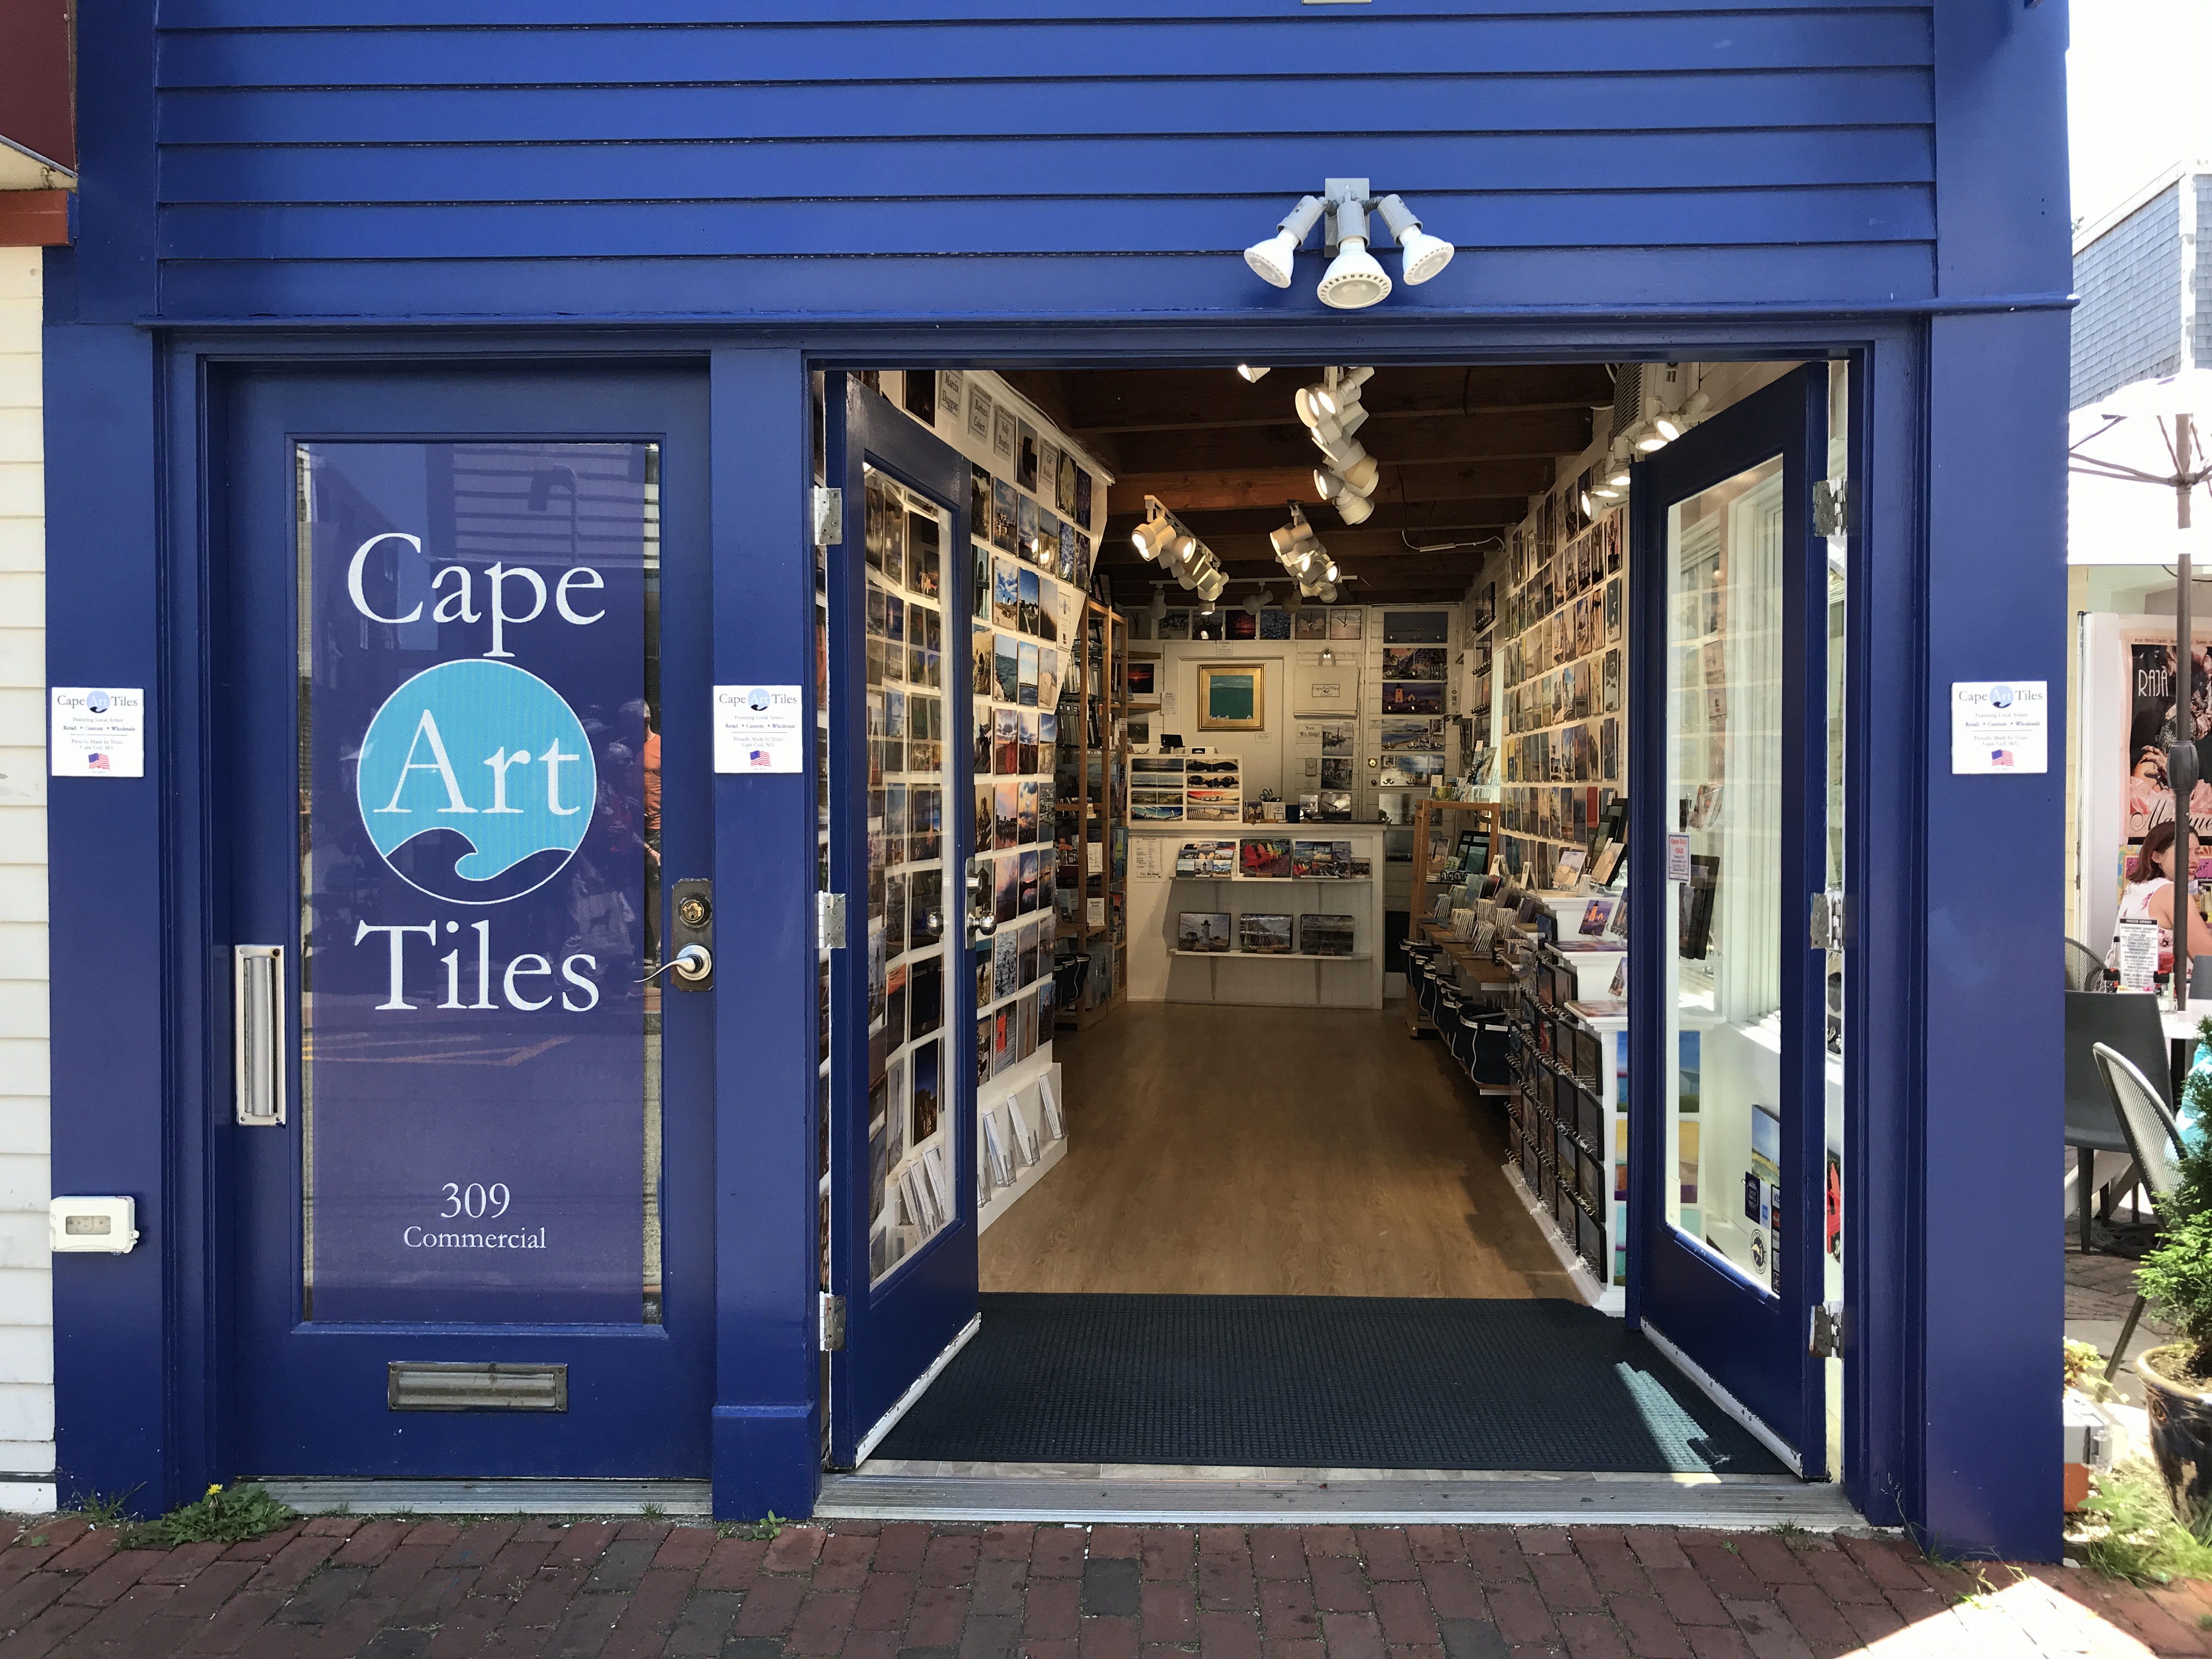 Cape Art Tiles made with sublimation printing